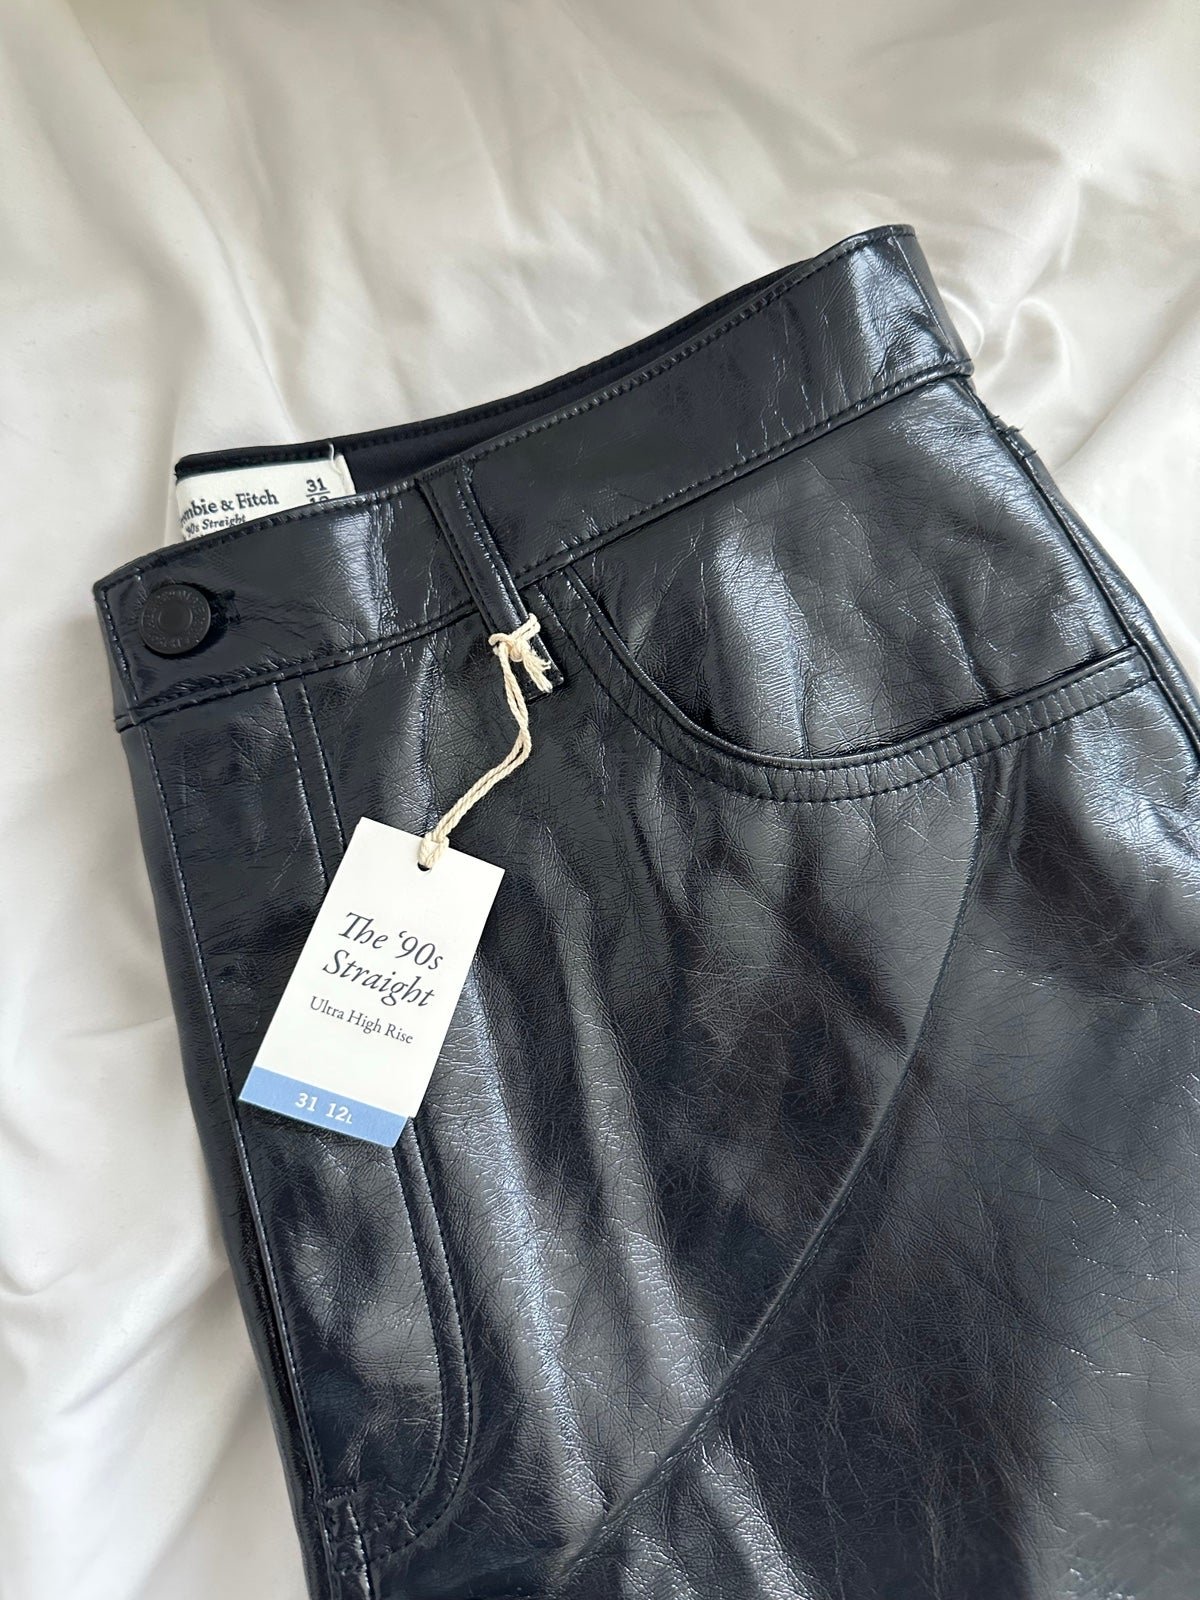 Fashion Abercrombie and Finch leather pants m8KGQMRa7 just buy it